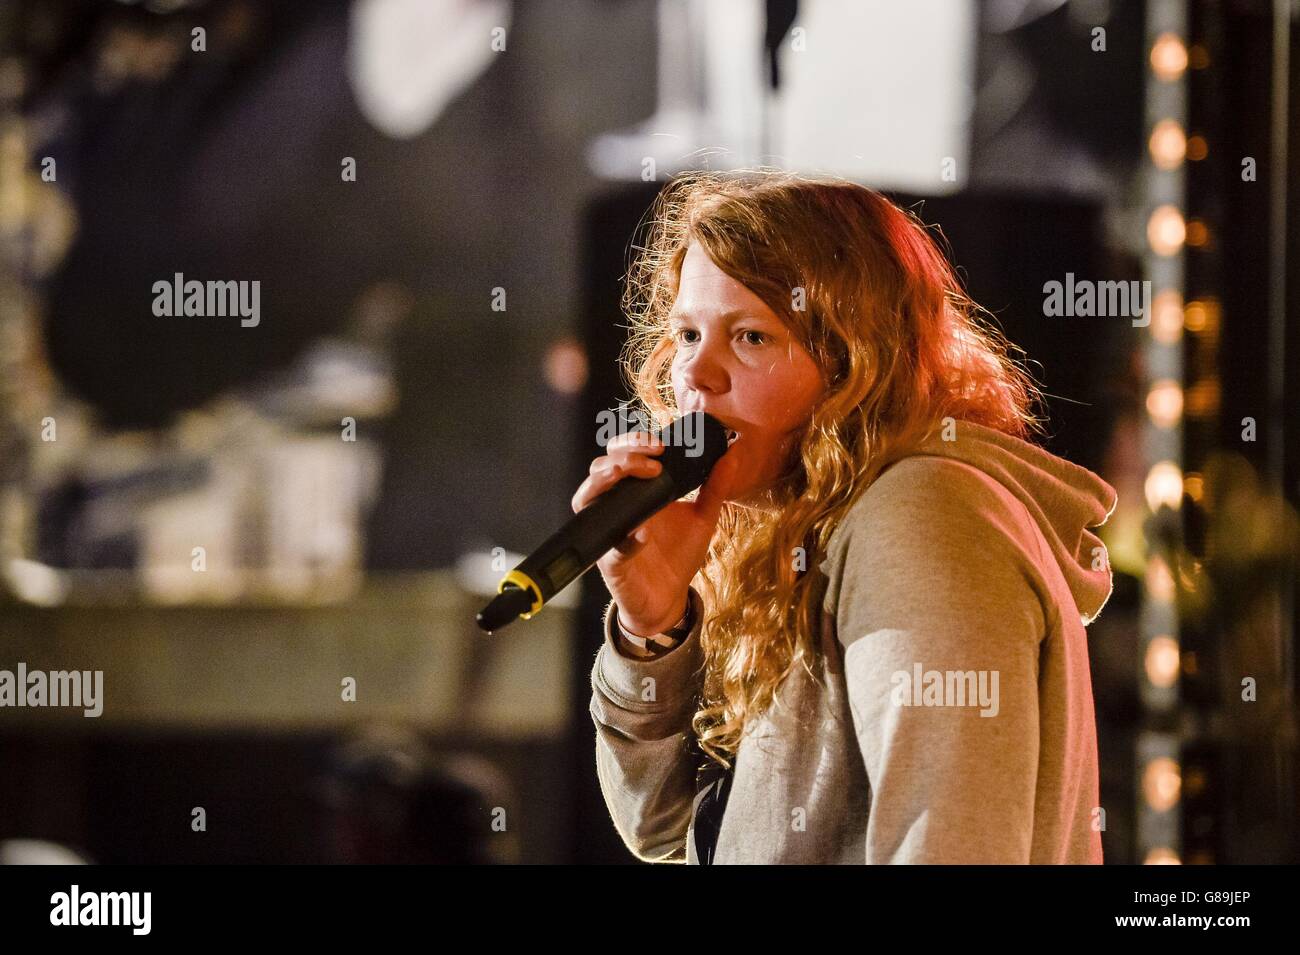 Kate Tempest performs at Banksy's 'Dismaland' in Weston-super-Mare, Somerset. Stock Photo